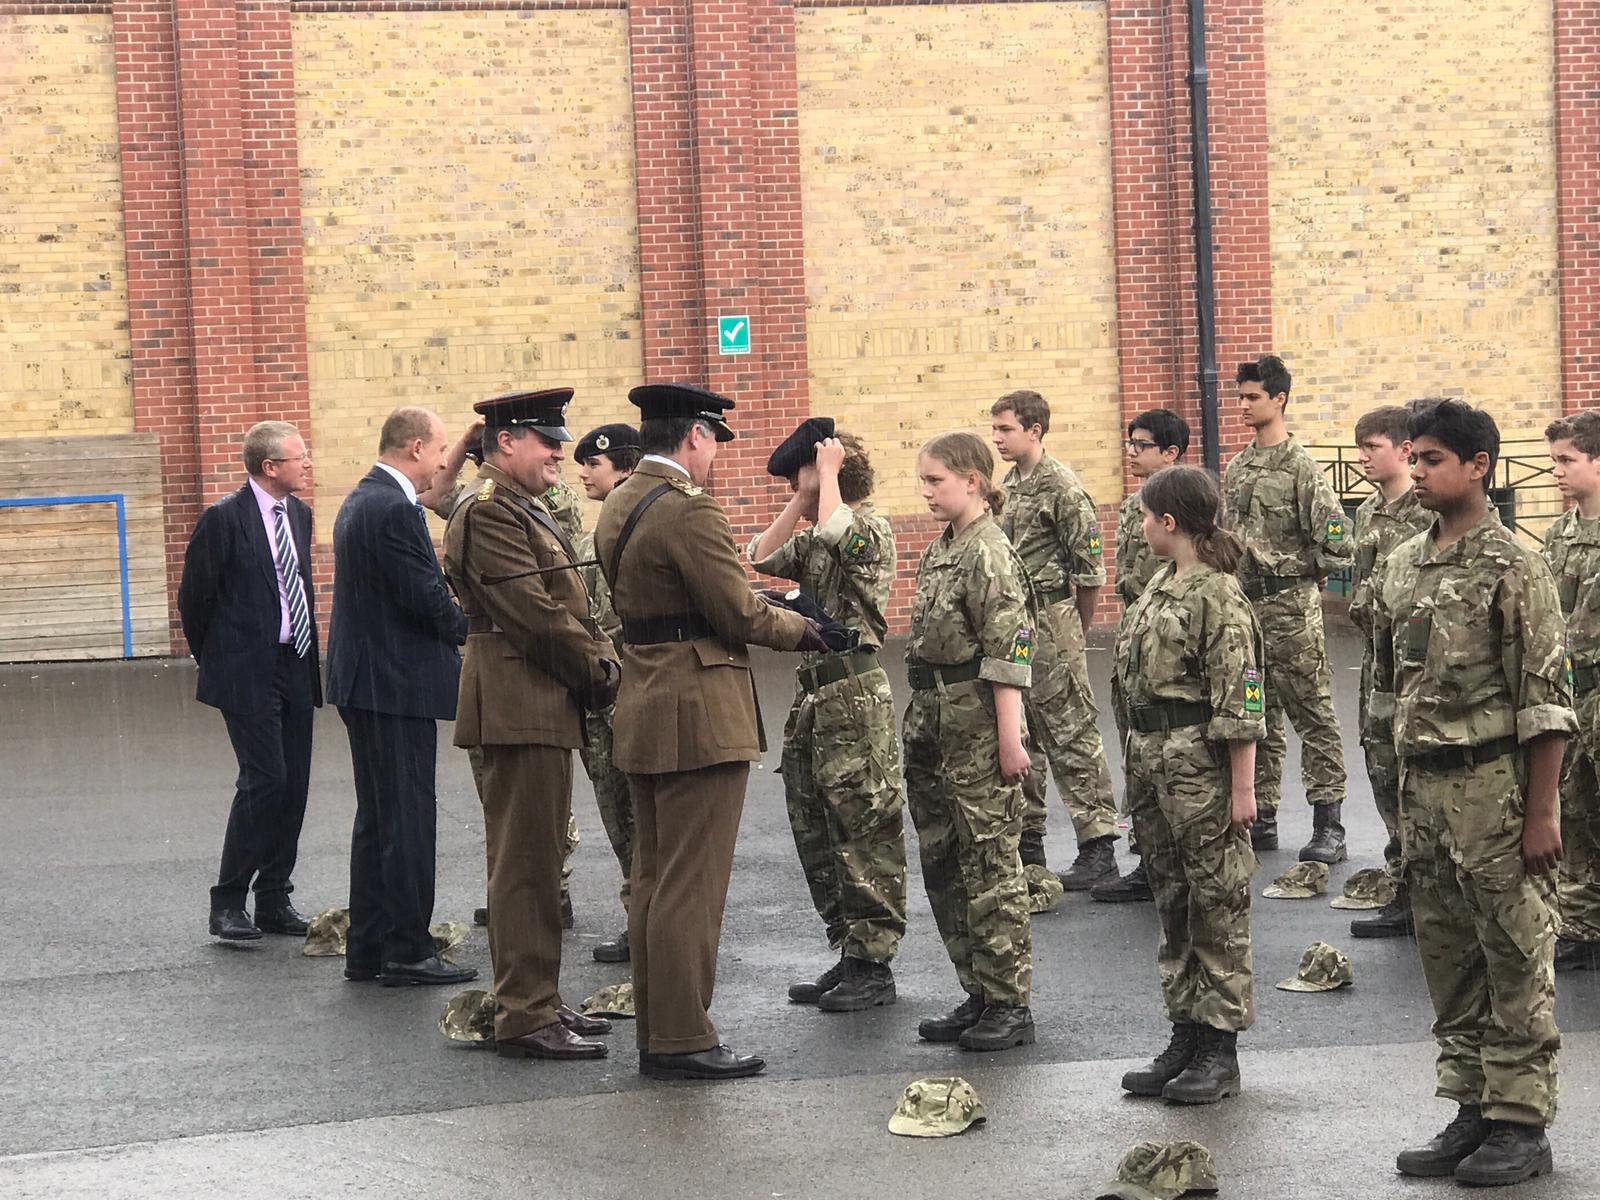 St Benedict's inspection and presentation of berets